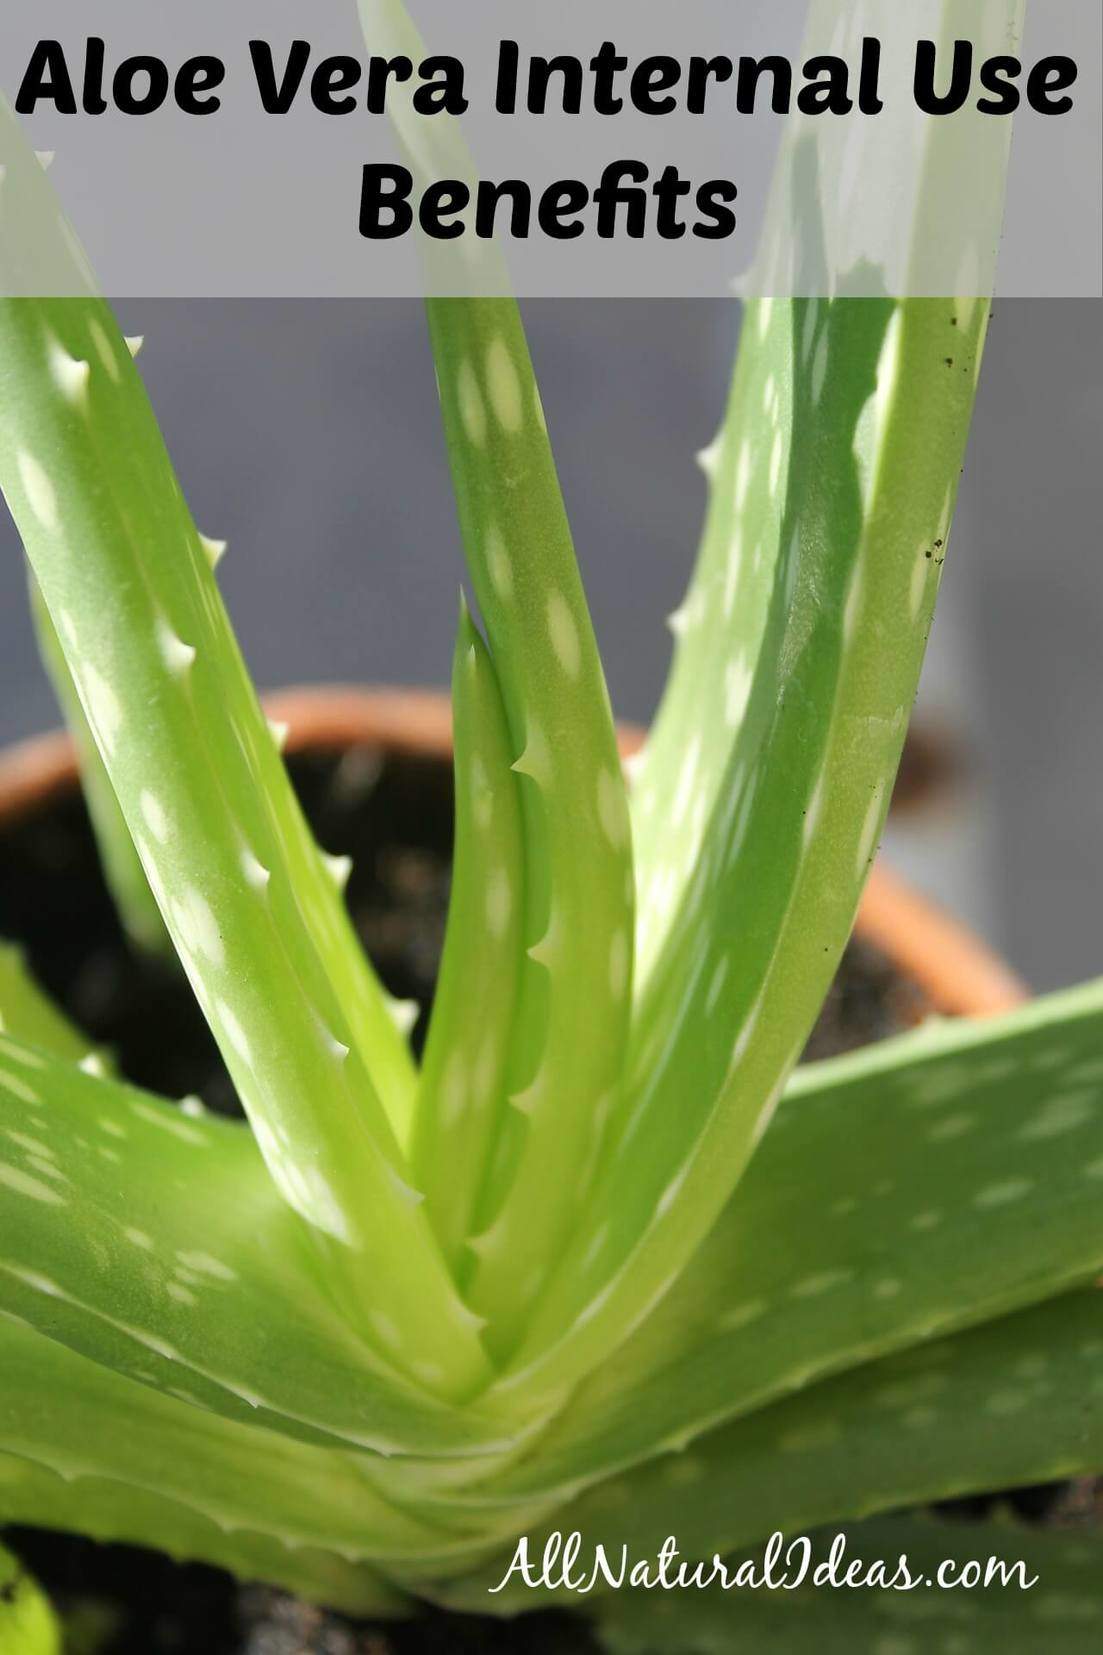 Aloe vera internal use benefits include stabilizing your body pH and providing essential minerals. It's not just for happier, healthier skin after sunburn.